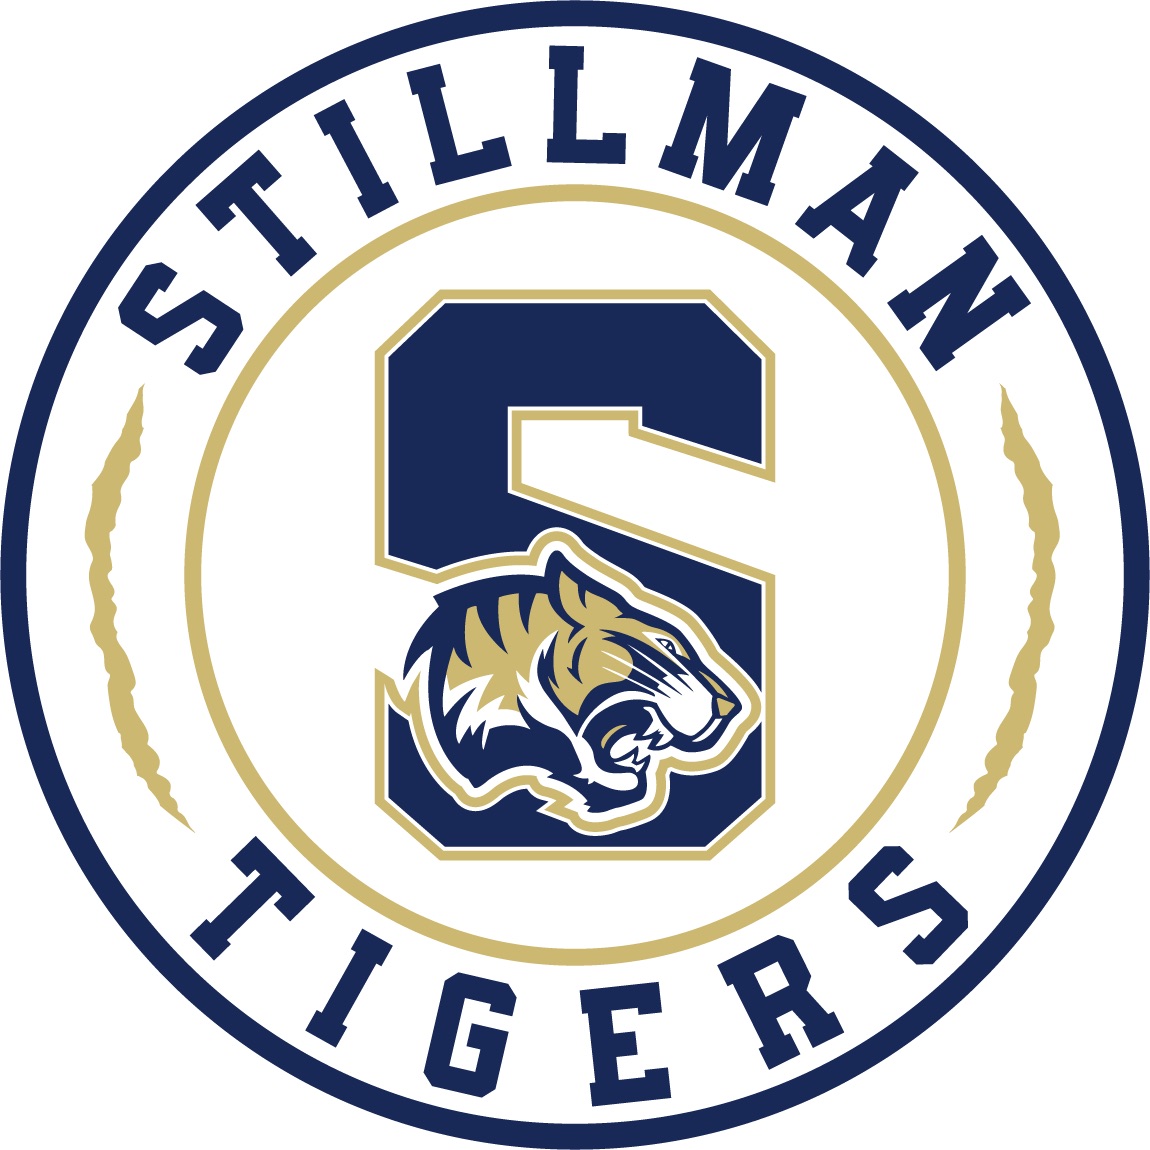 Stillman College Signs Multi-Year Agreement With Urban Edge Network Inc. To Broadcast Its Sports And Other Content On HBCU League Pass+